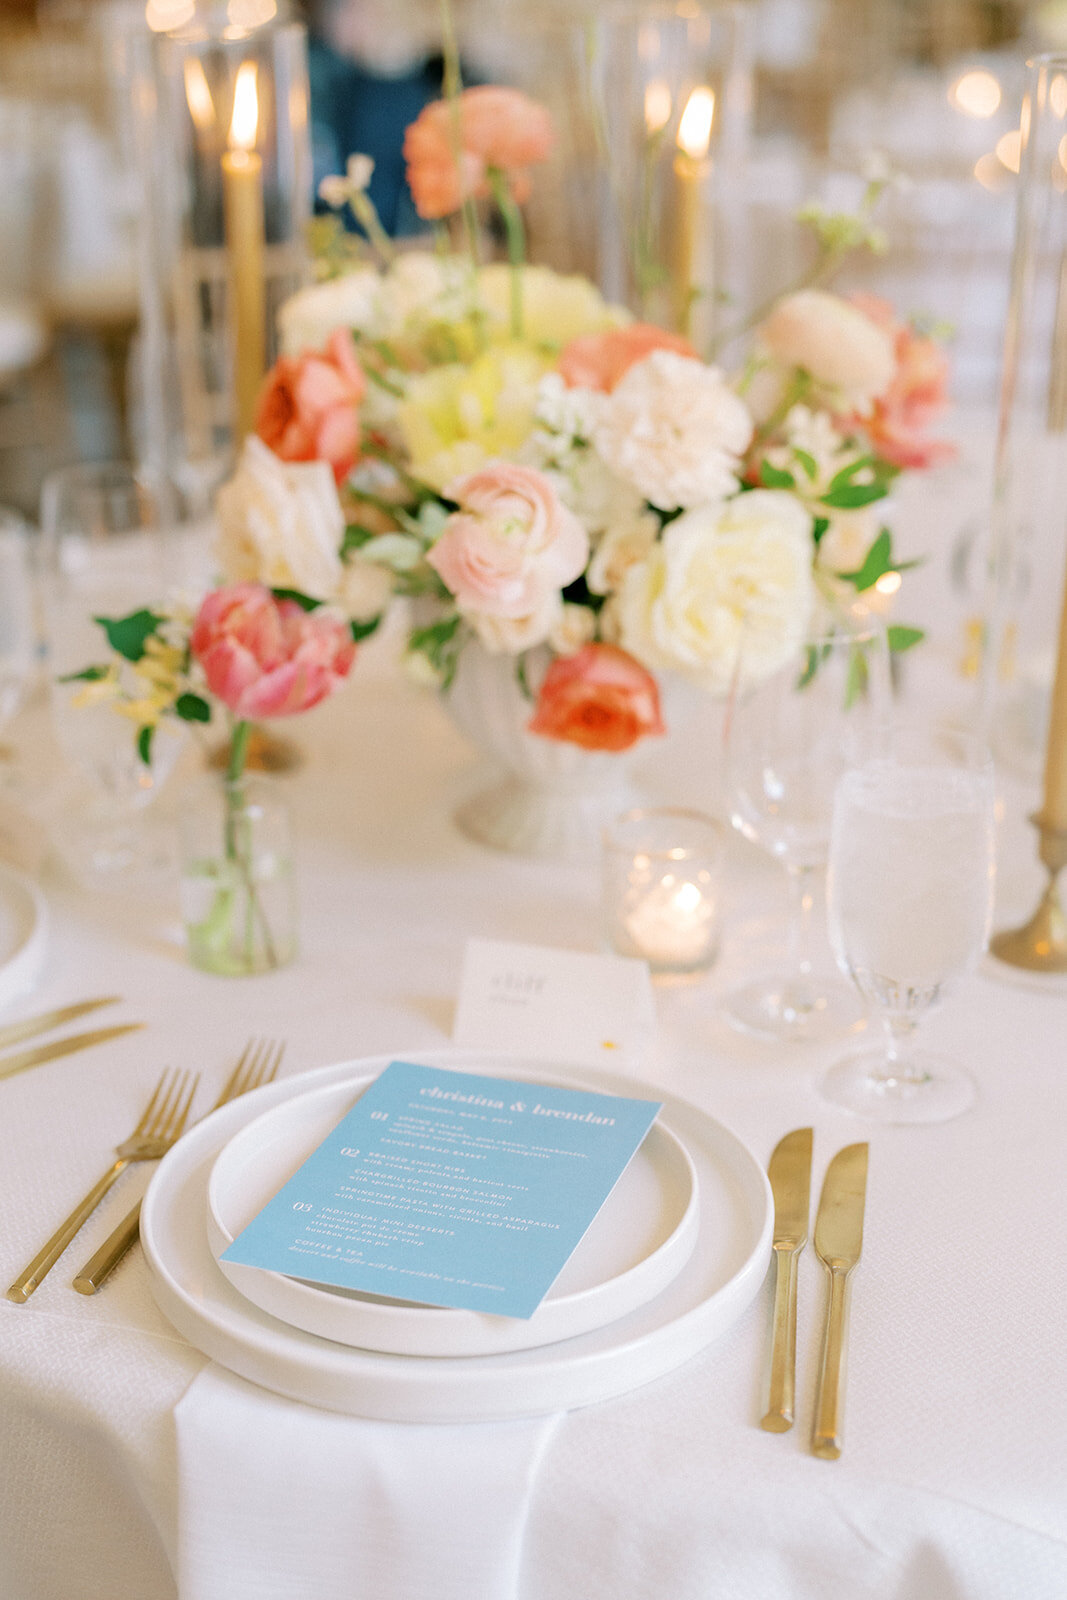 Brielle-Davis-Events-DAR-Constitution-Hall-Spring-Wedding-Colorful-place-setting